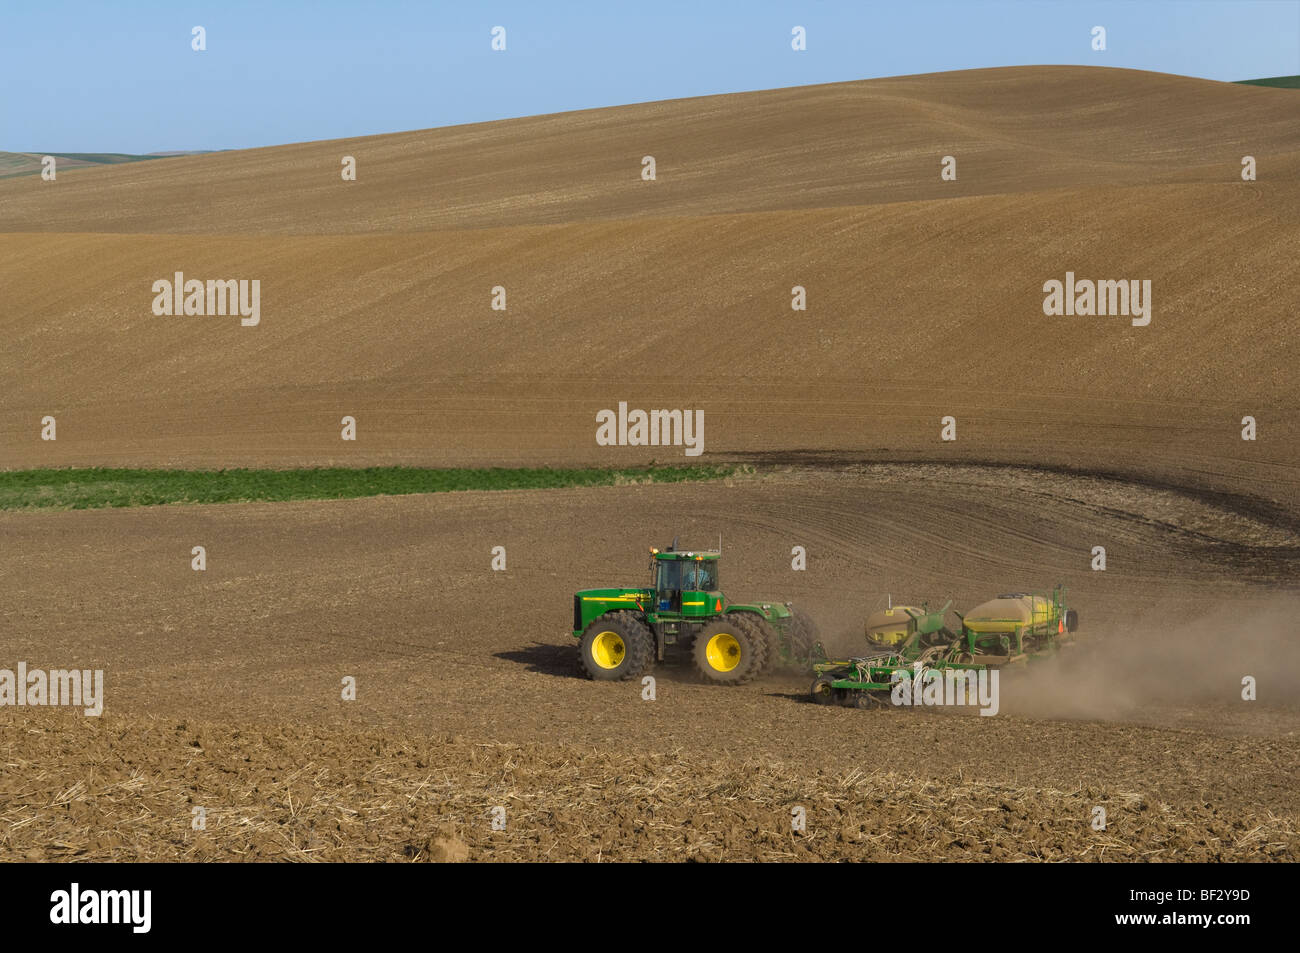 A John Deere tractor and air seeder planting garbanzo beans (chick peas) in the rolling hills of the Palouse / Washington, USA. Stock Photo